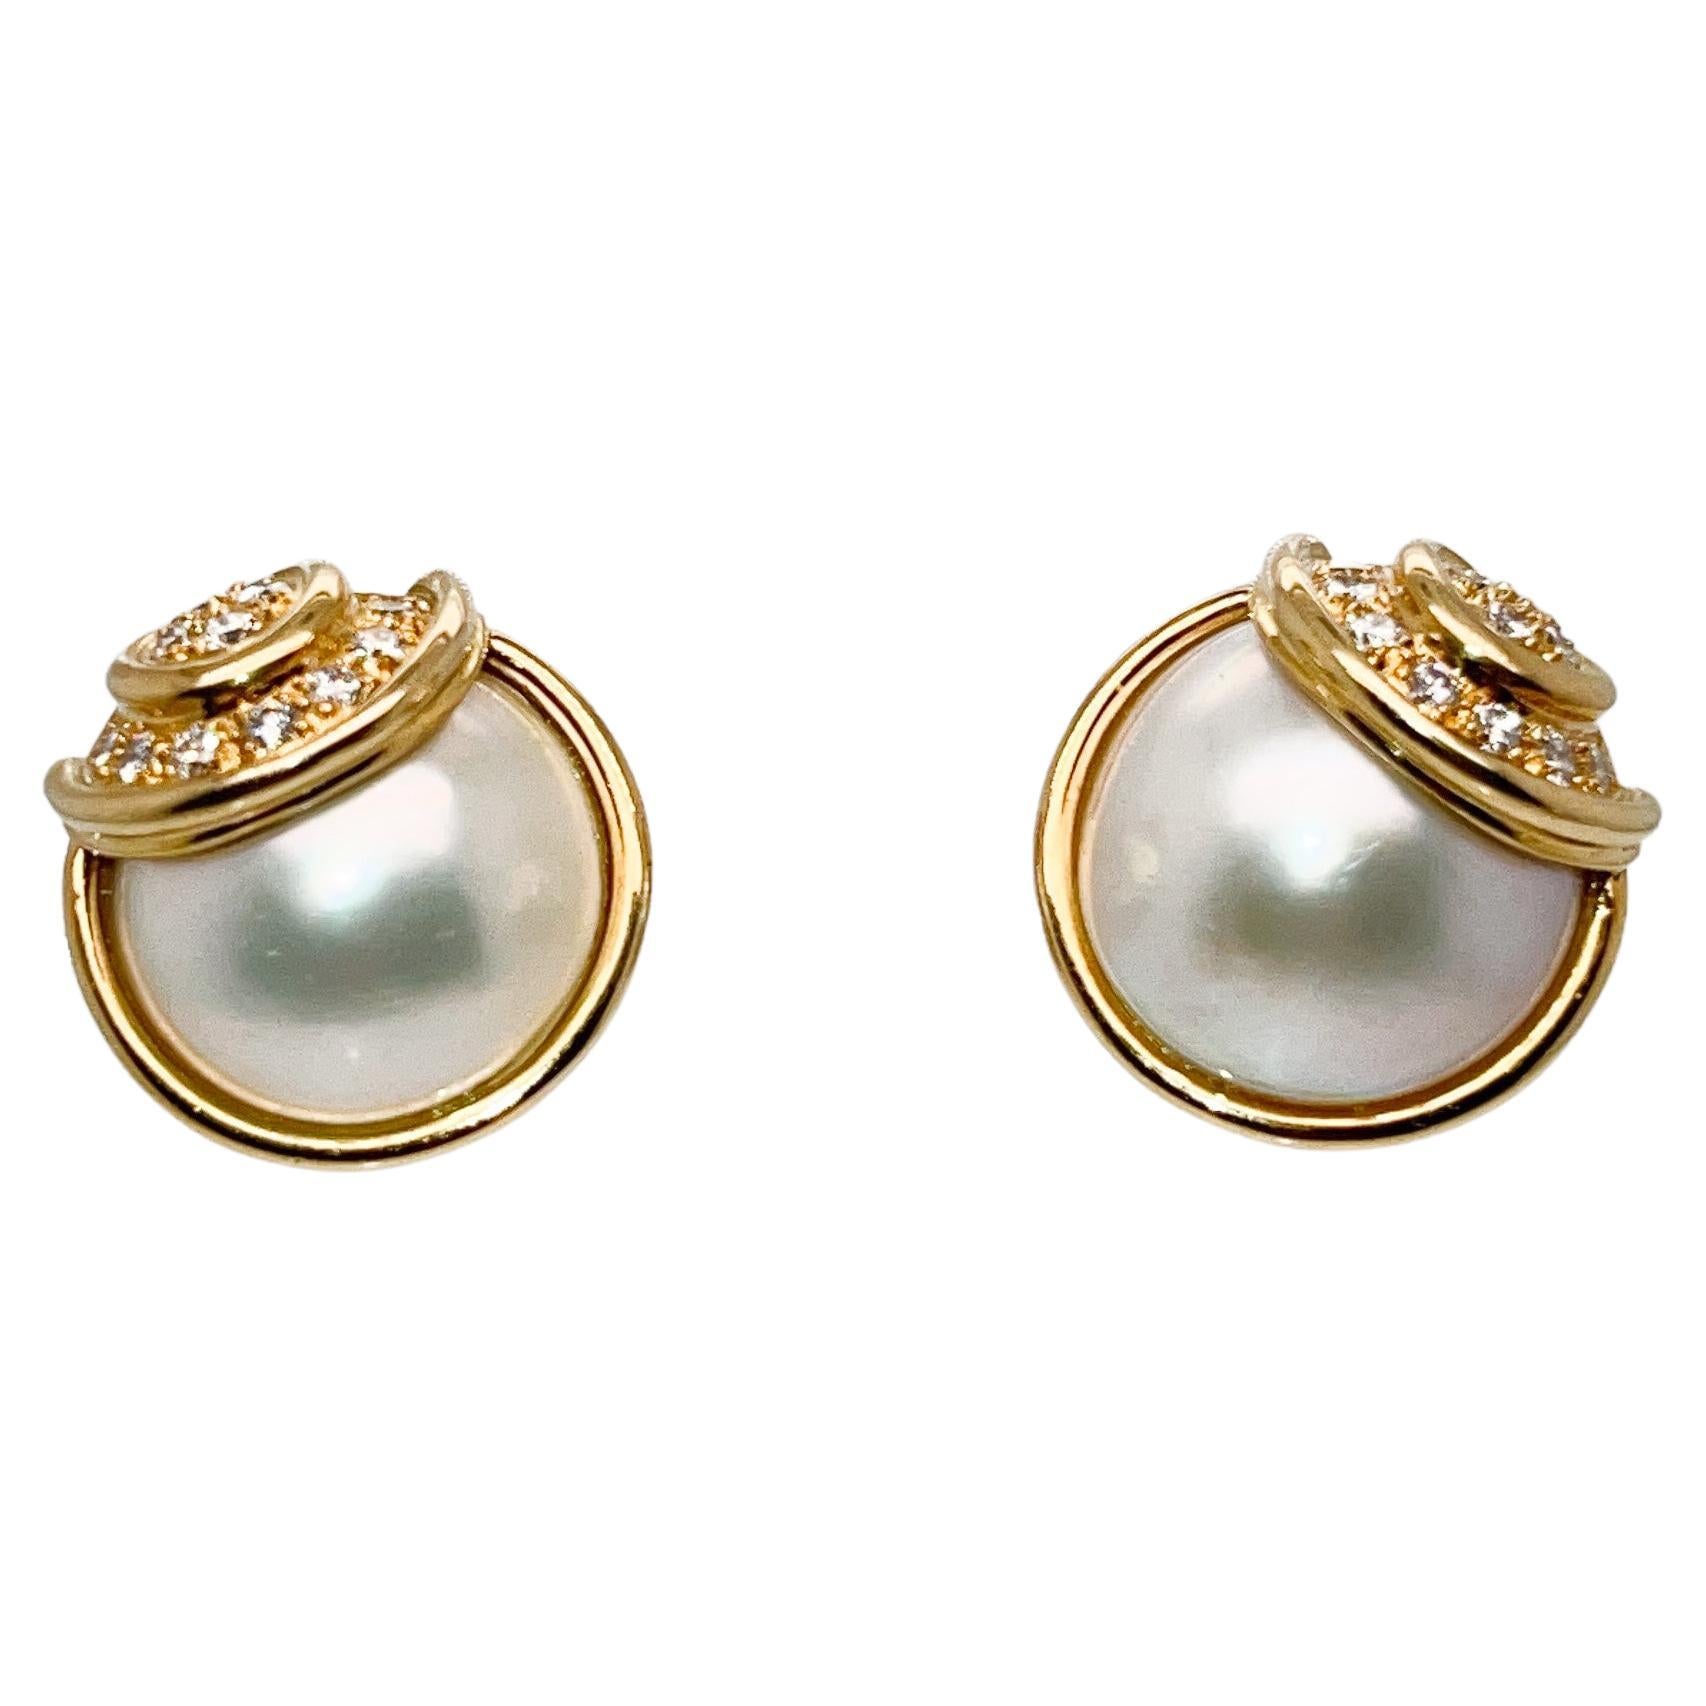 Modern Pair of Signed Gübelin 18K Gold, Diamond & Mabe Pearl Clip-On Earrings For Sale